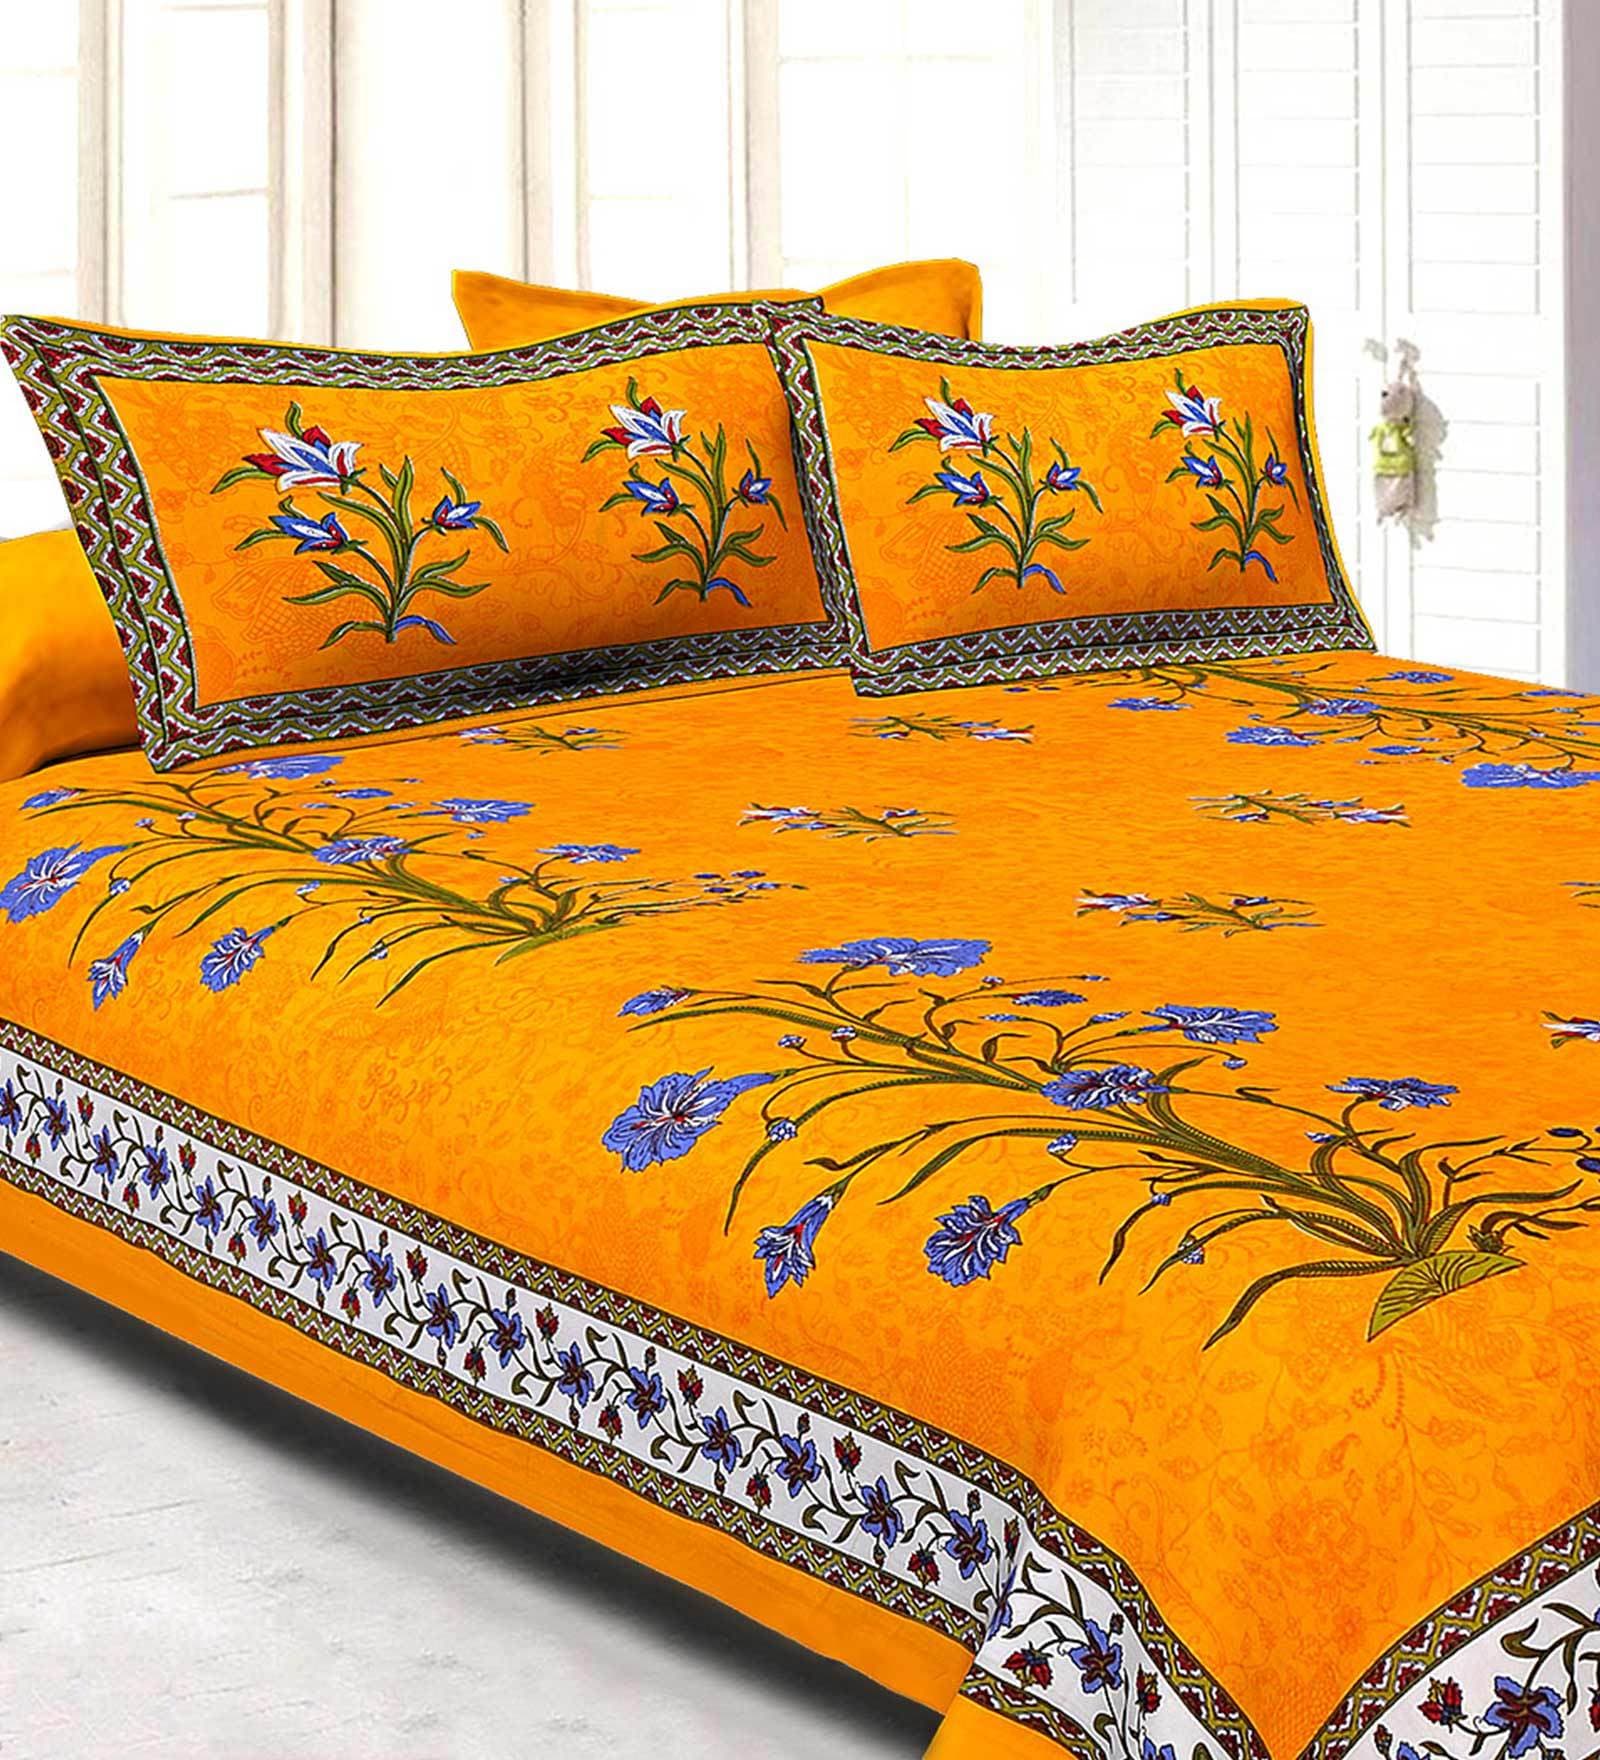 Buy Orange Floral 300 Tc Cotton 1 Double Bedsheet With 2 Pillow Covers By Jaipur Fabric At 40 2514